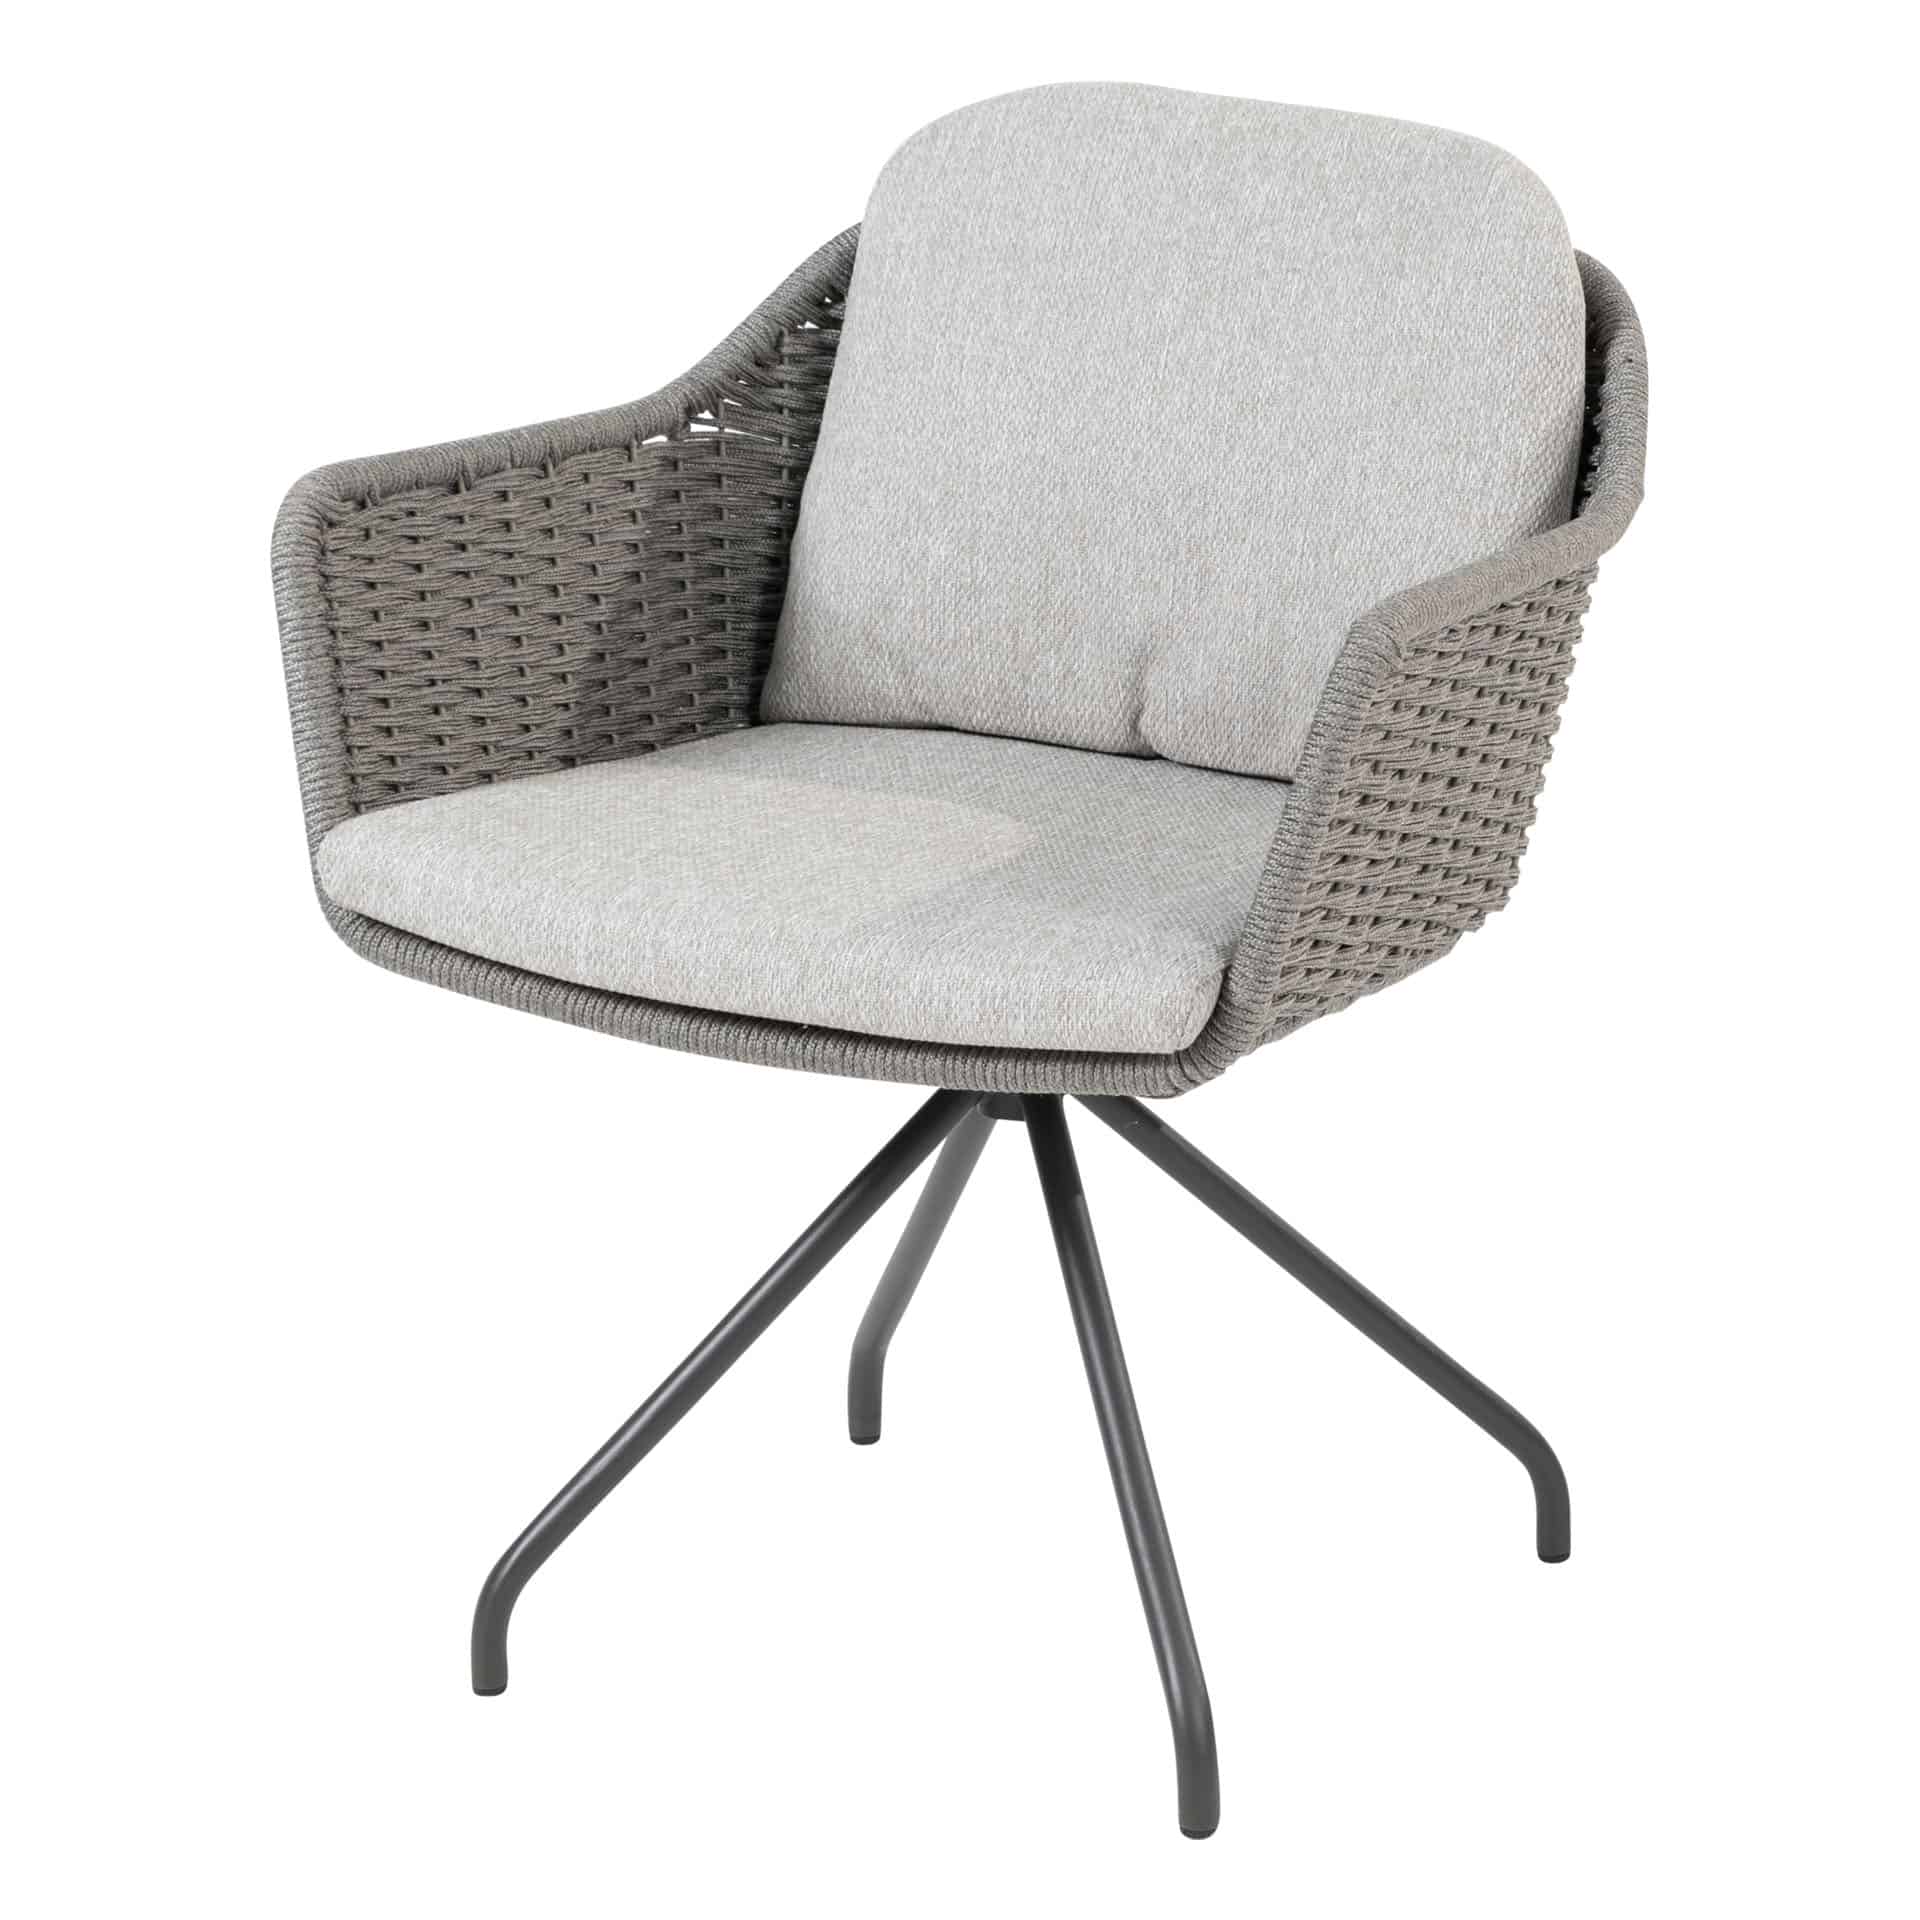 213929_-Focus-dining-chair-silvergrey-with-2-cushions-01